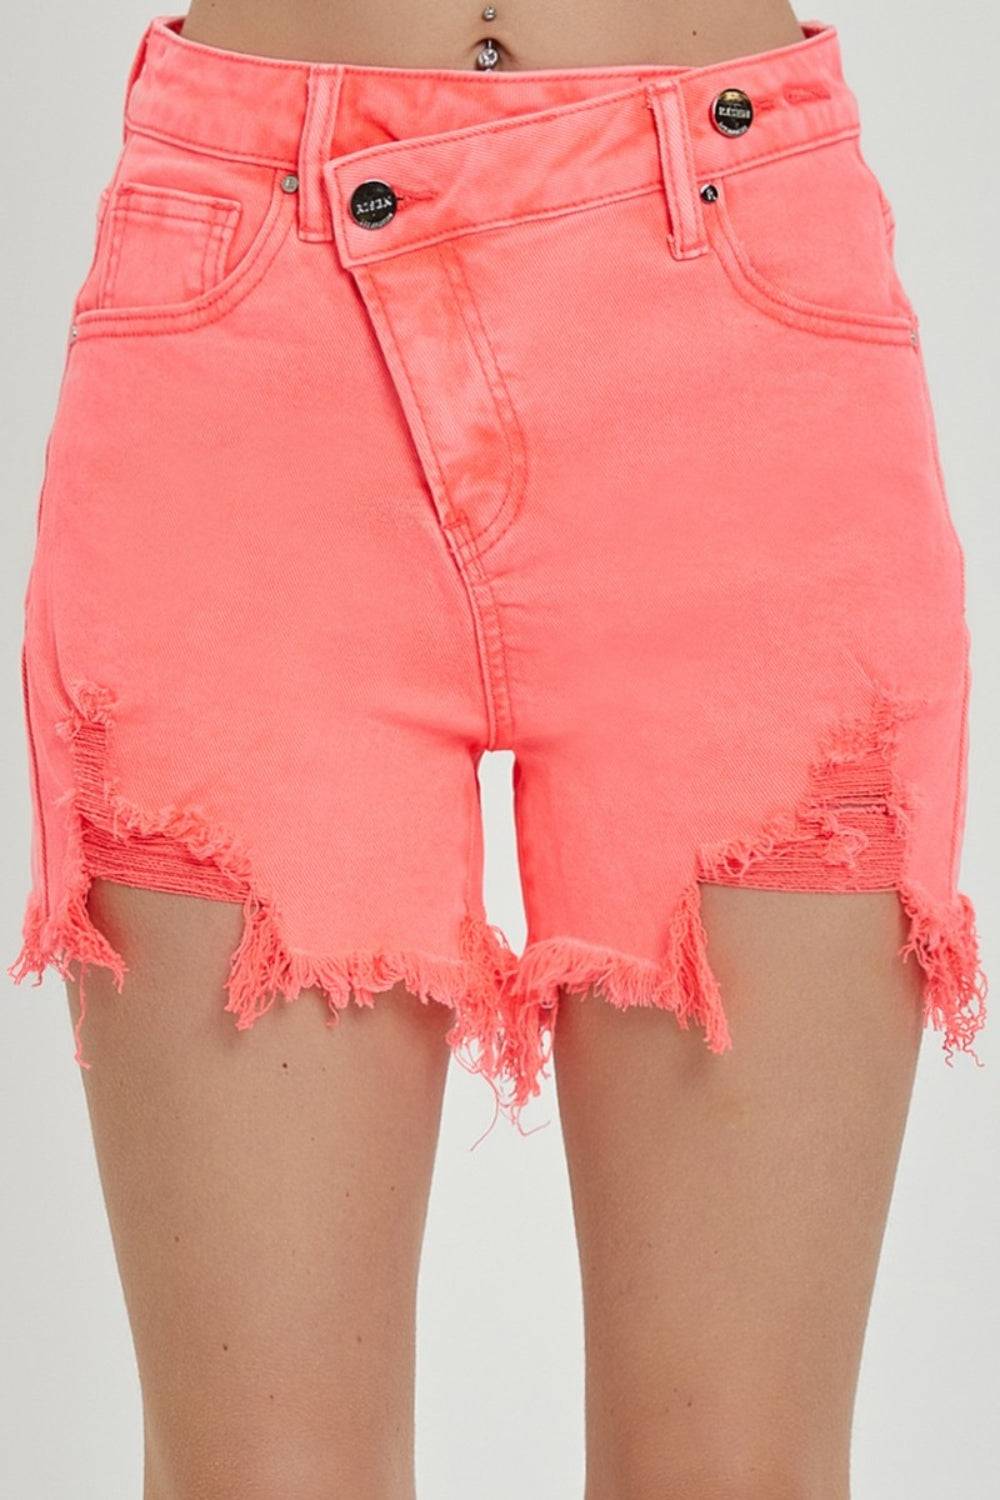 a woman's shorts with a hole in the side